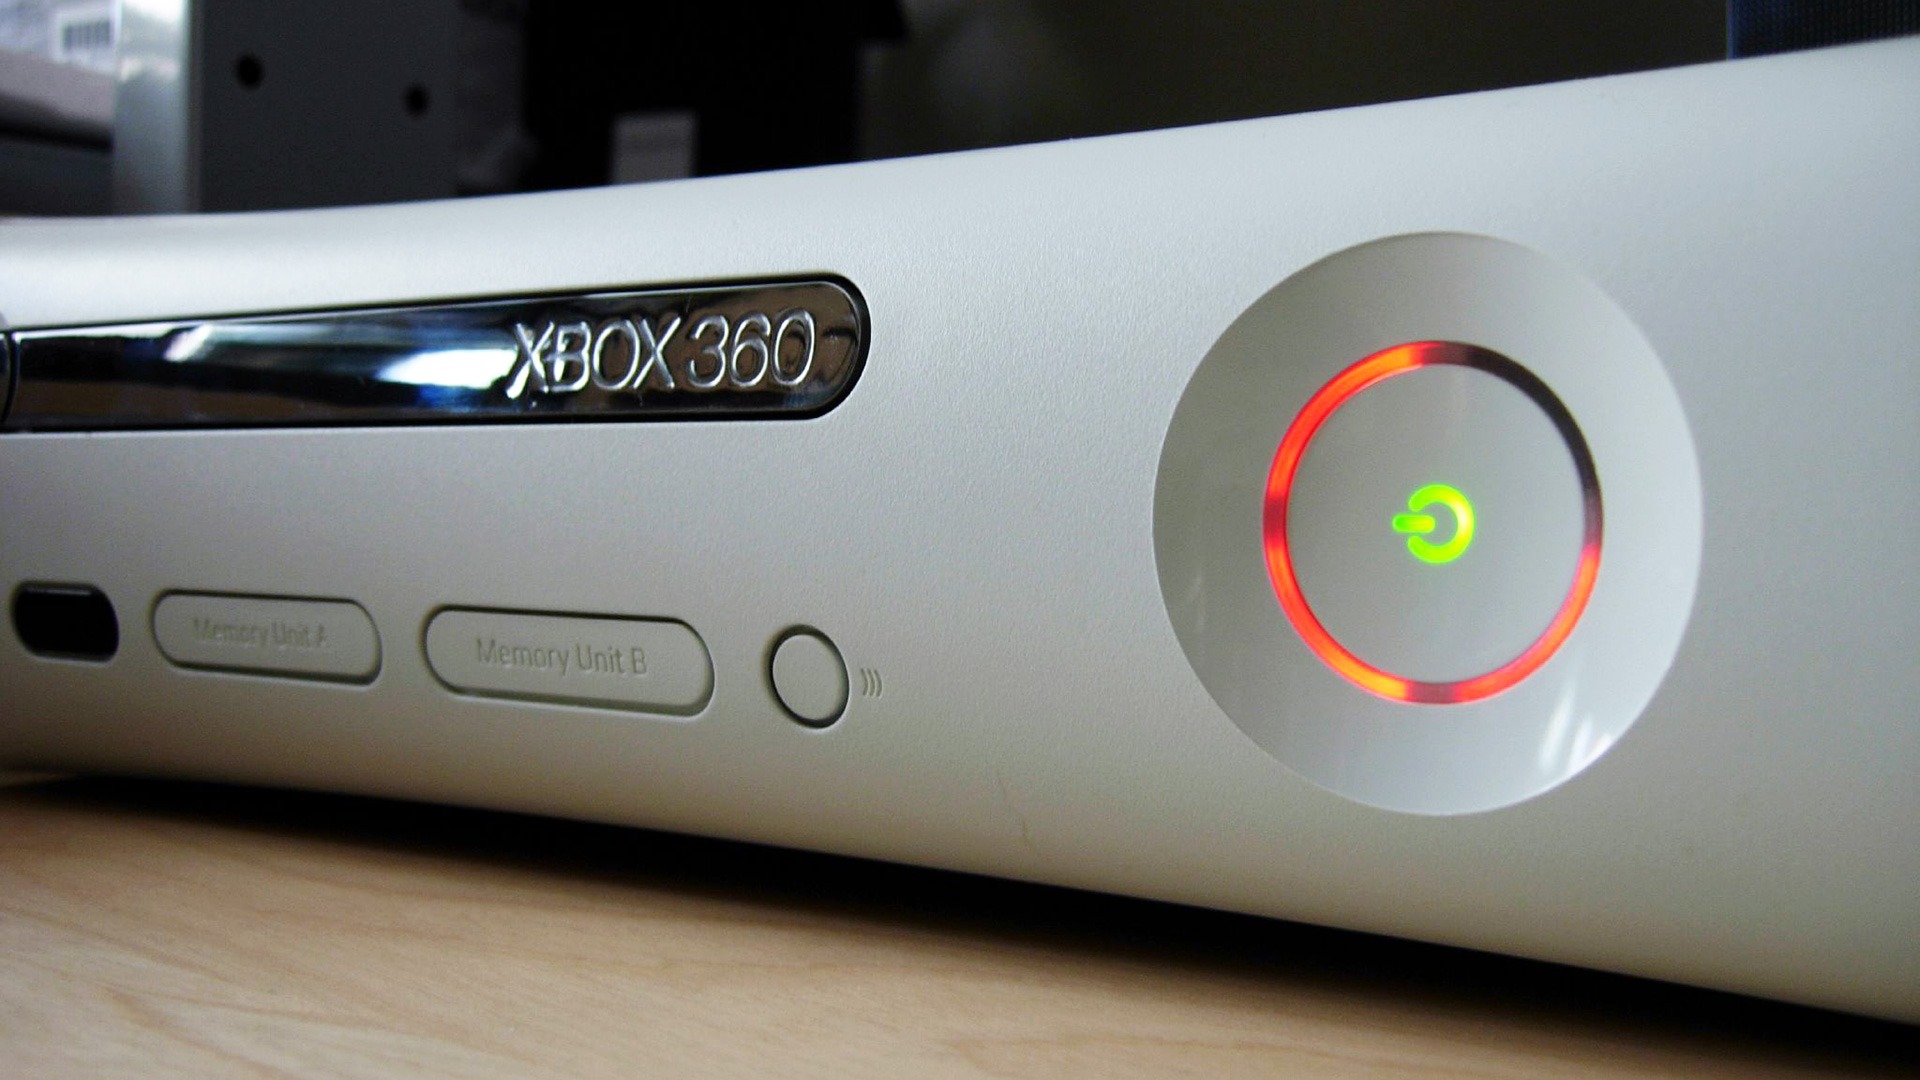 Xbox 360-Ring of Death